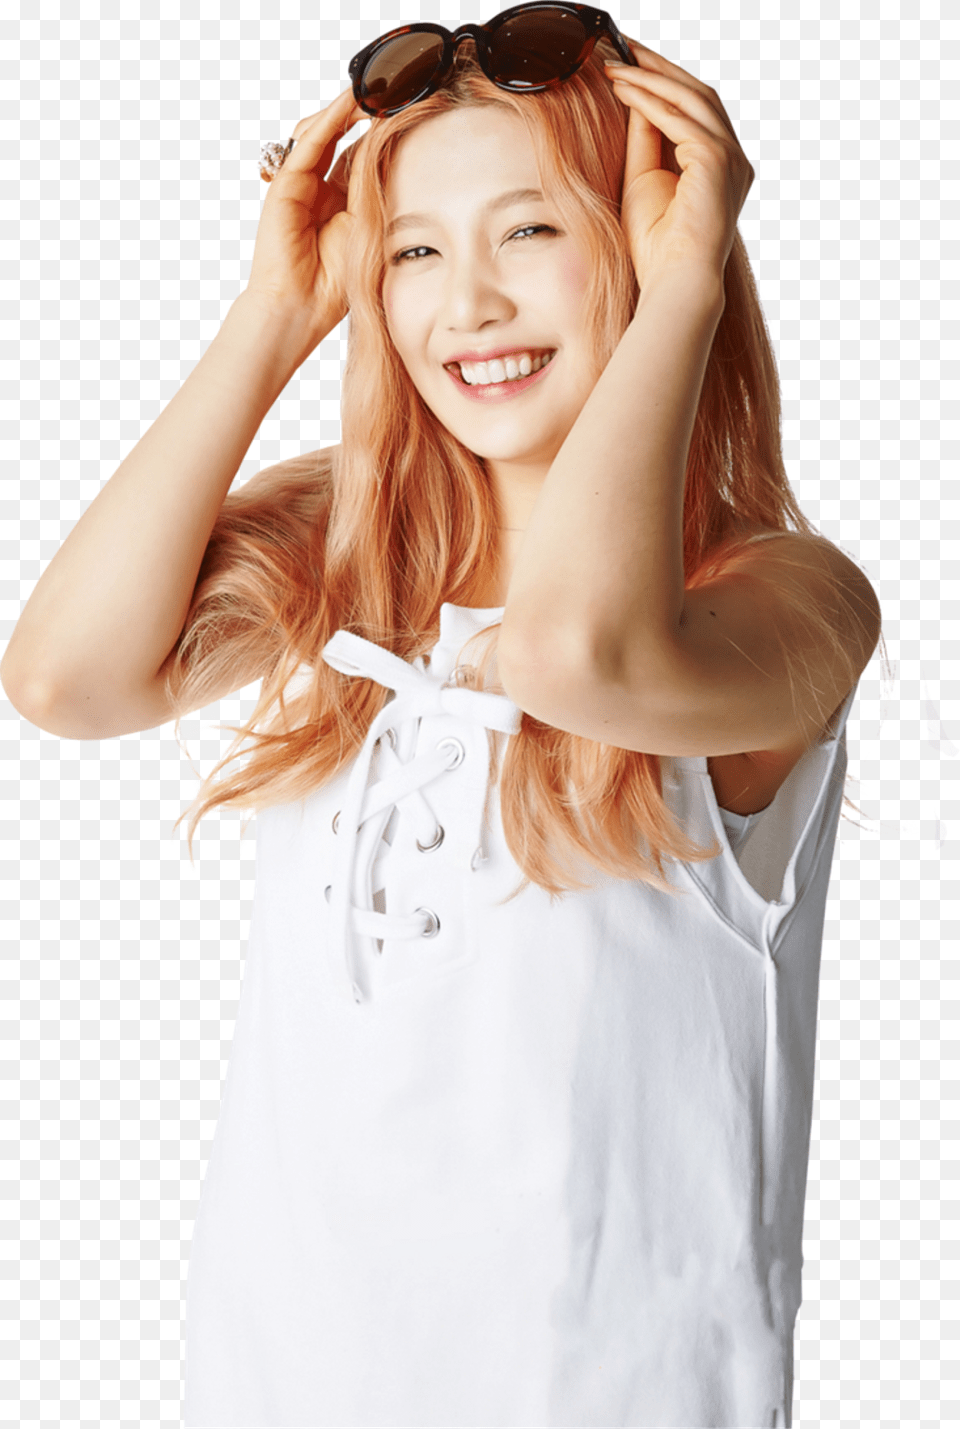 Sign In To Save It To Your Collection Joy Red Velvet, Accessories, Sunglasses, Smile, Portrait Png